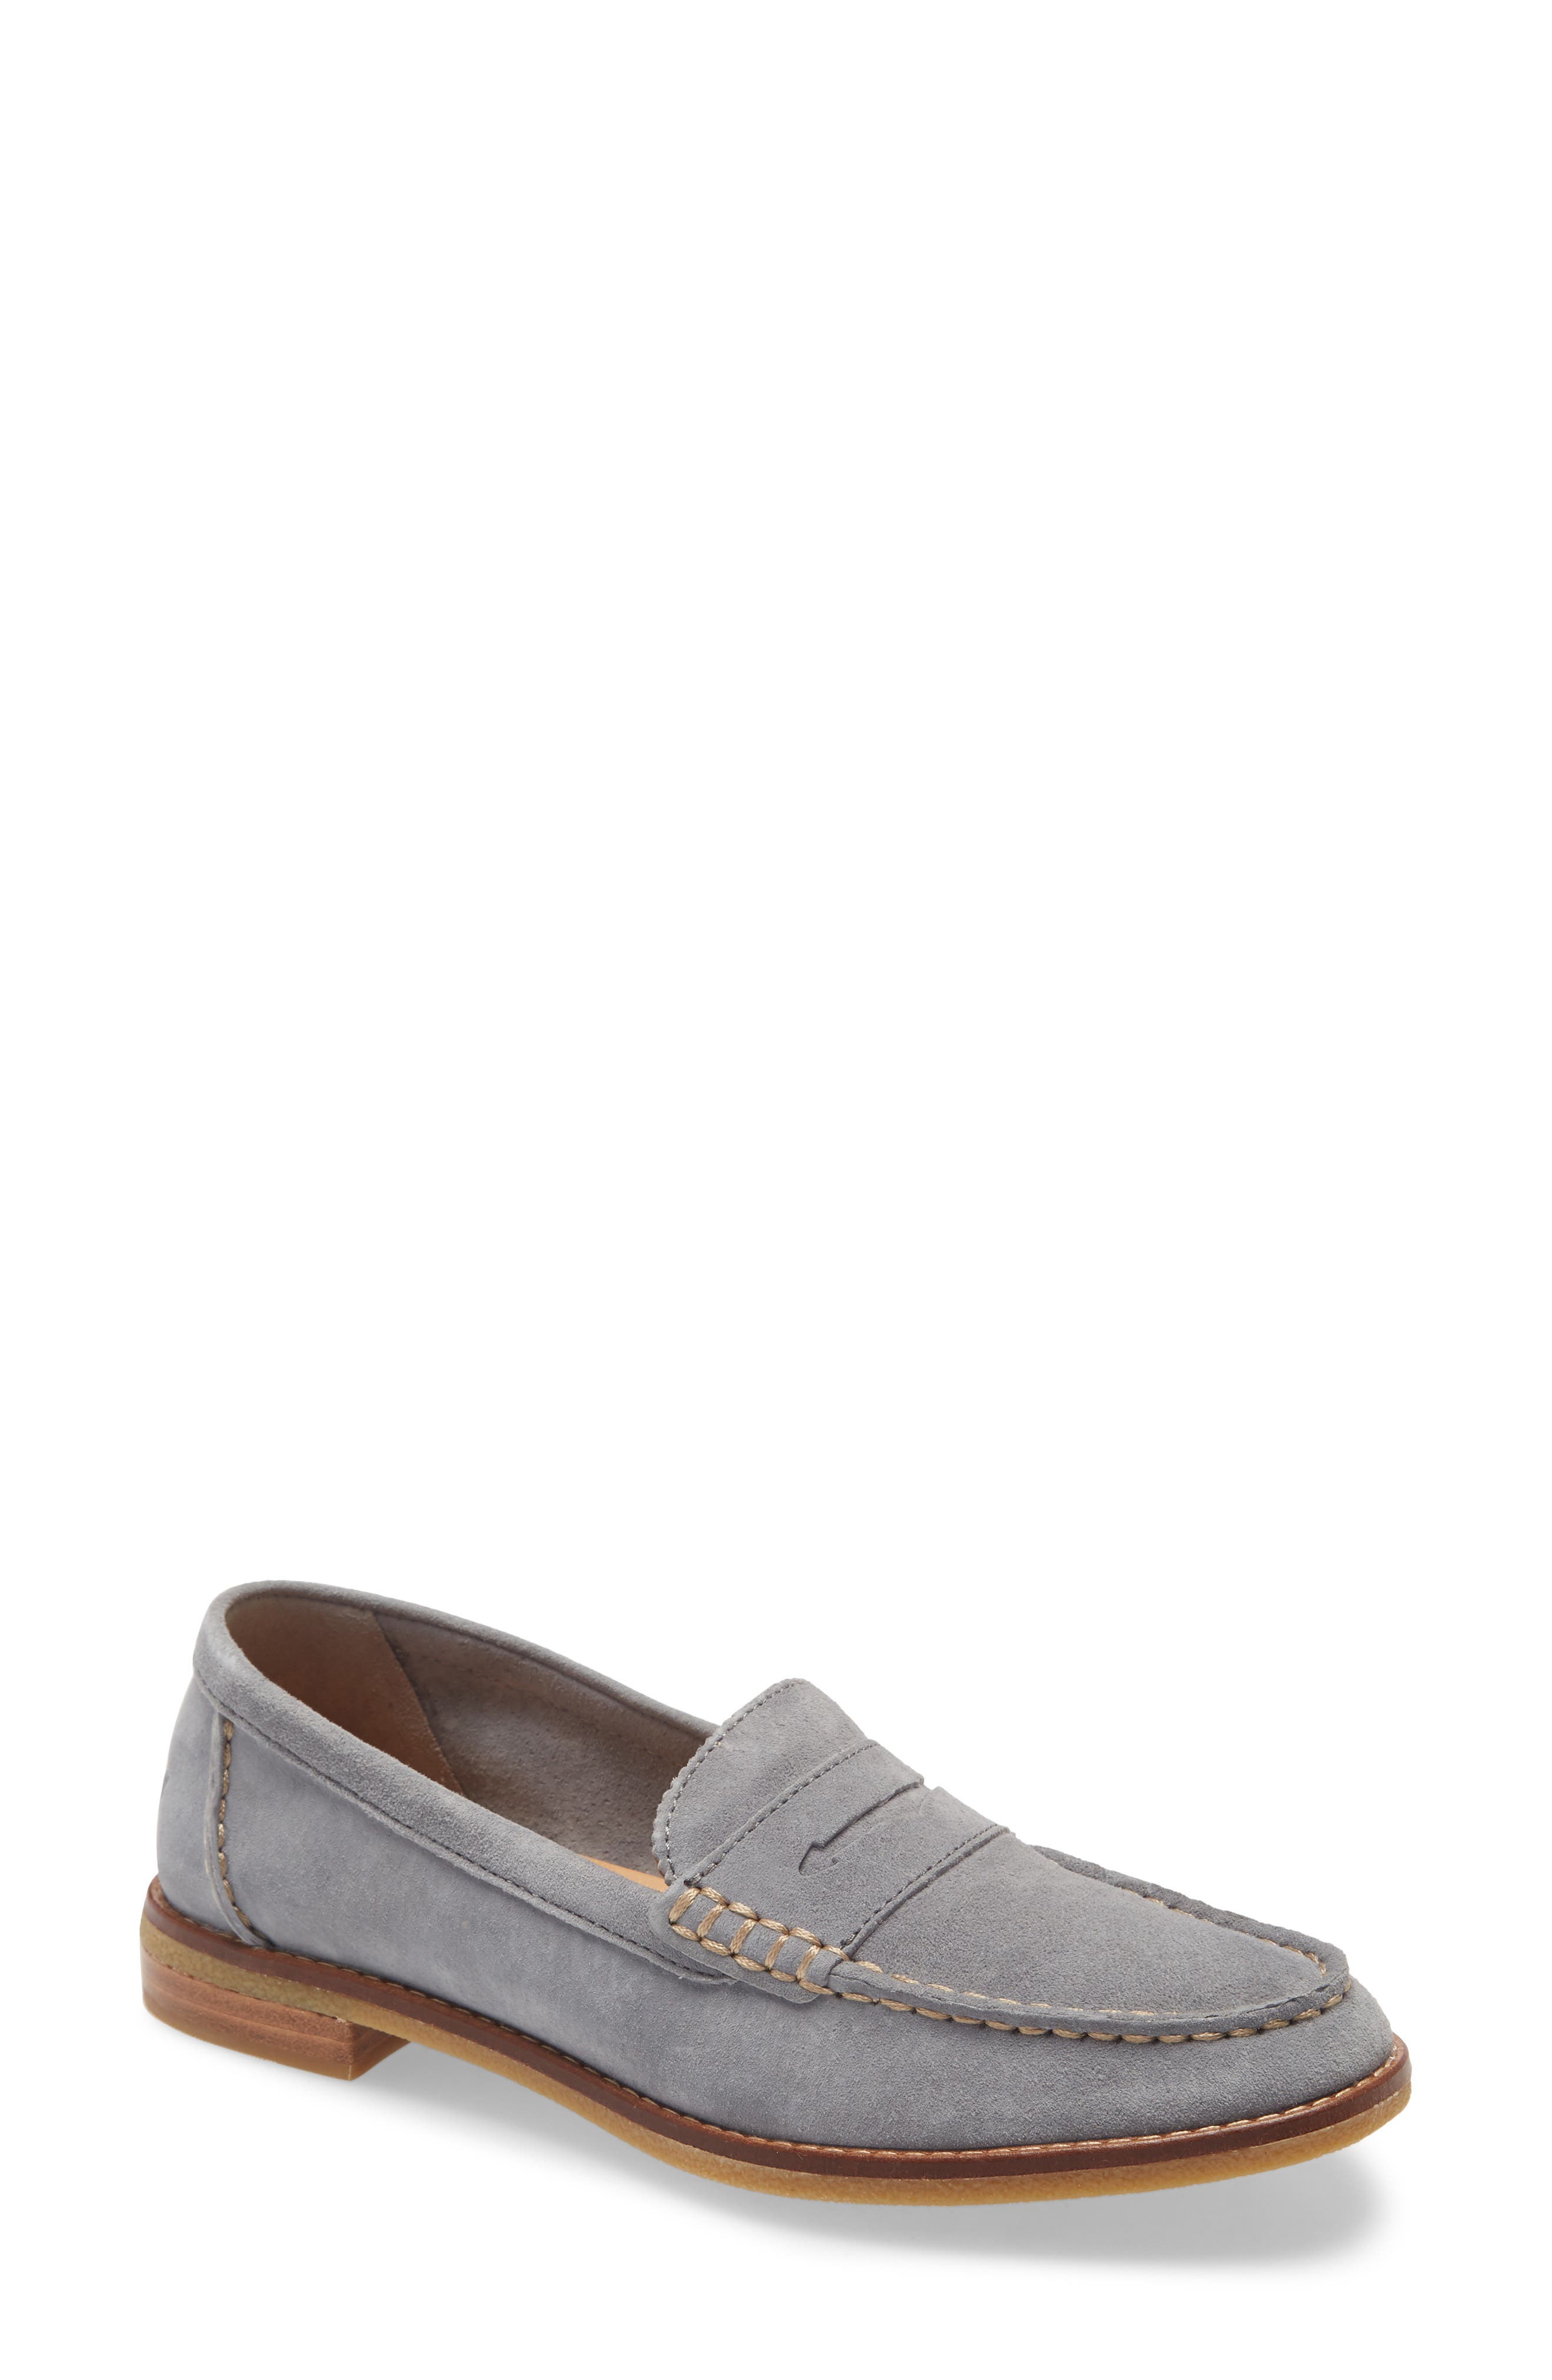 sperry penny loafers womens